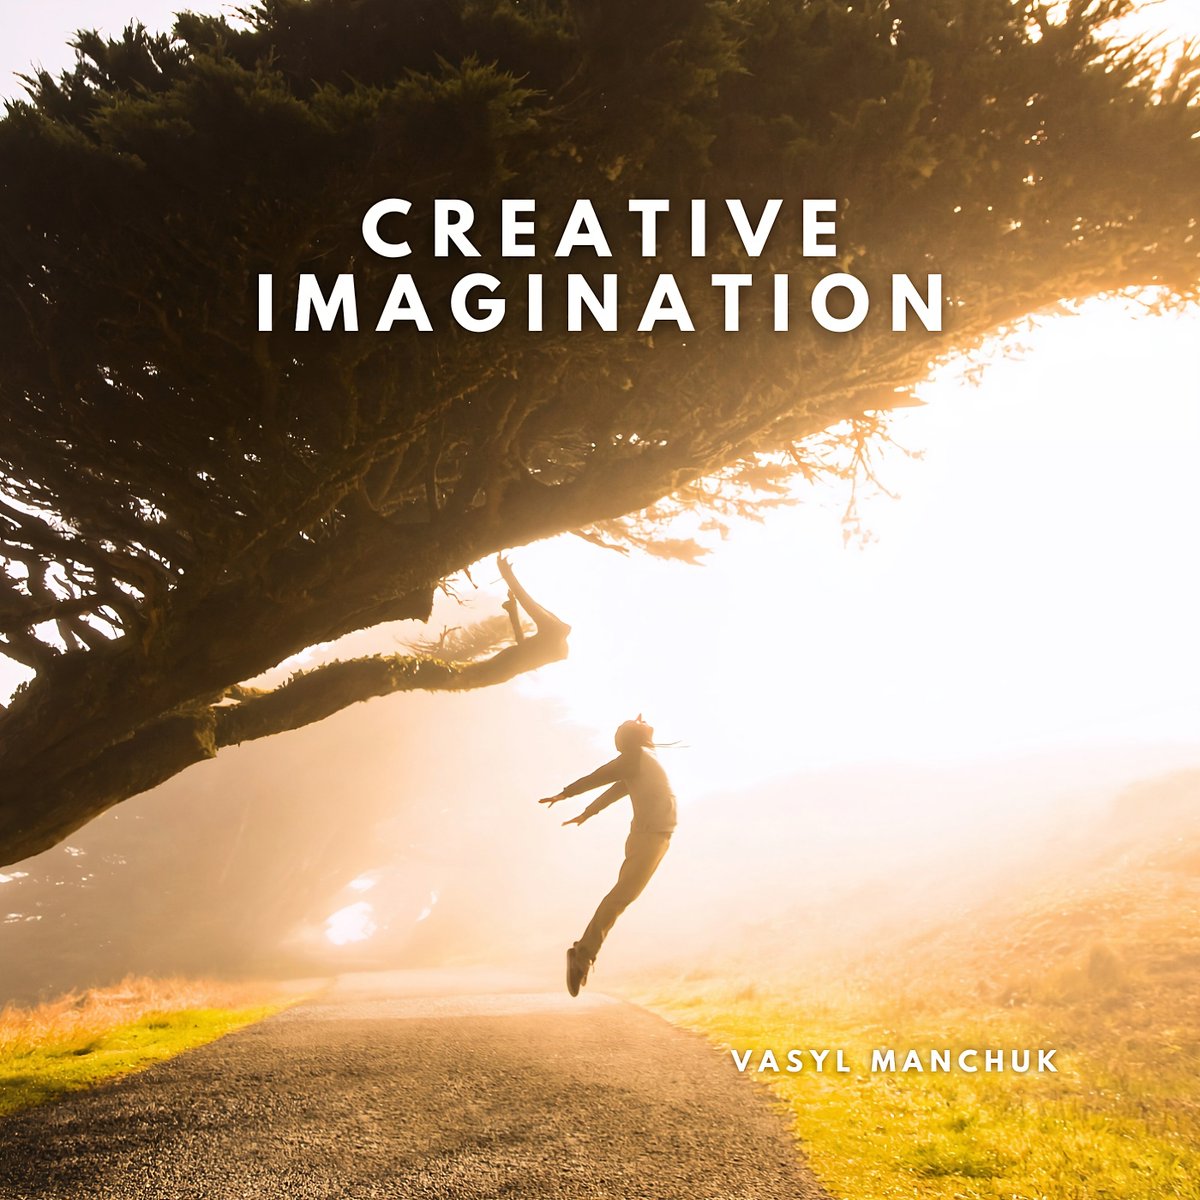 Pre-save my new single 'Creative Imagination' on Spotify: distrokid.com/hyperfollow/va… (powered by @distrokid) #chillout #ambient #instrumental #spotify #NewMusic #NewReleases #composer #soundproducer #Vasyl_Manchuk #musicforvideo #piano #guitar